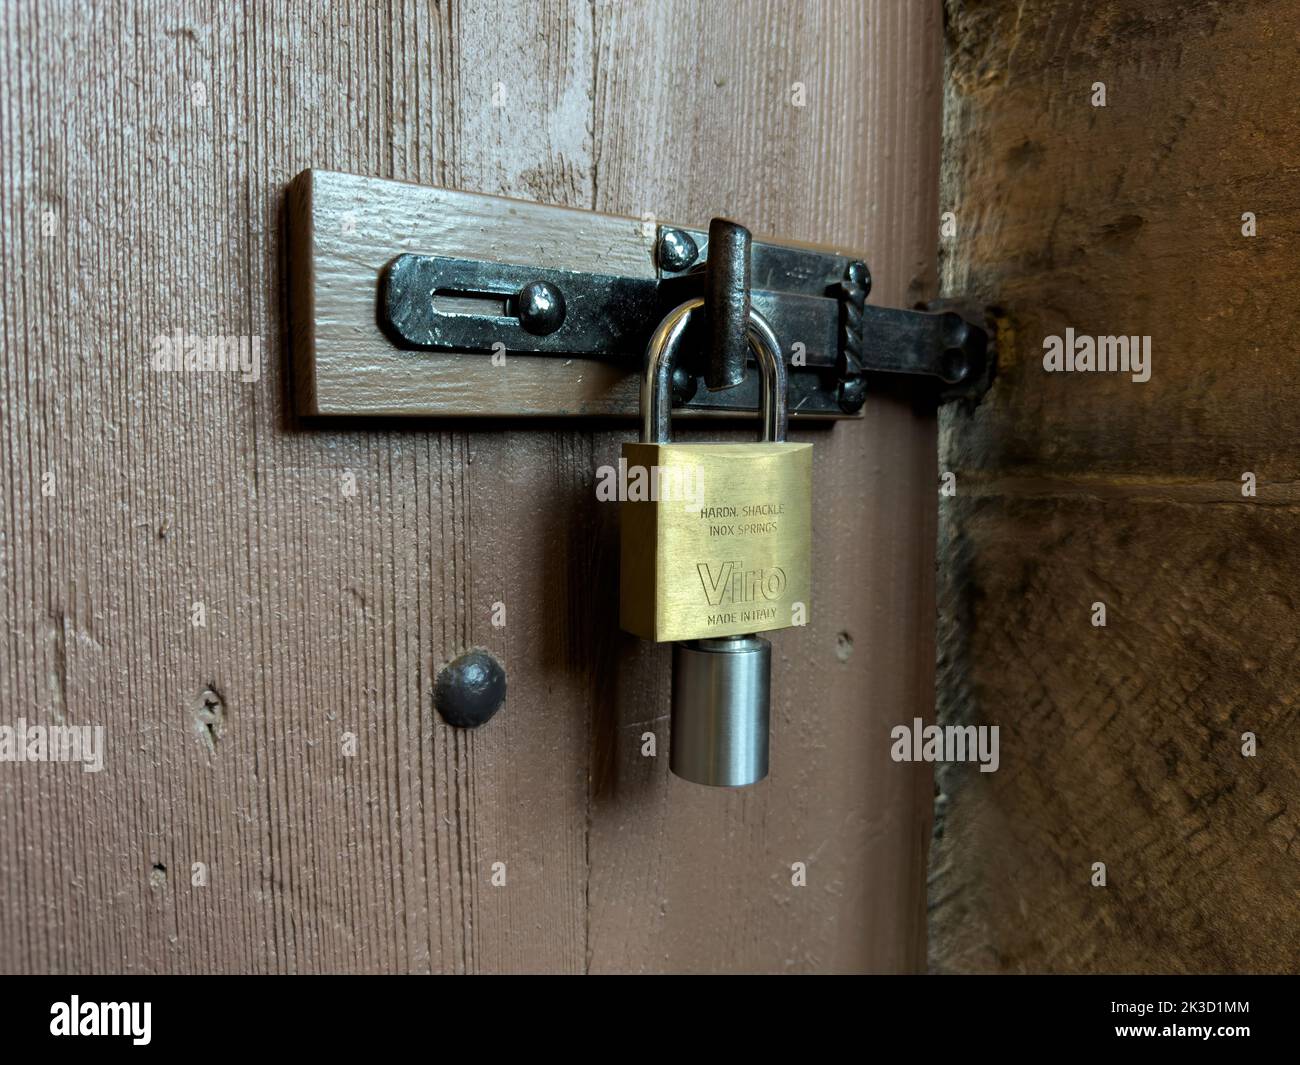 Paris, France - Sep 21, 2022: Old door padlock with inox springs at the cathedral with logotype Viro made in Italy manufacturer of Padlocks, Cylinders, Cam Locks, Safes and Security Systems Stock Photo